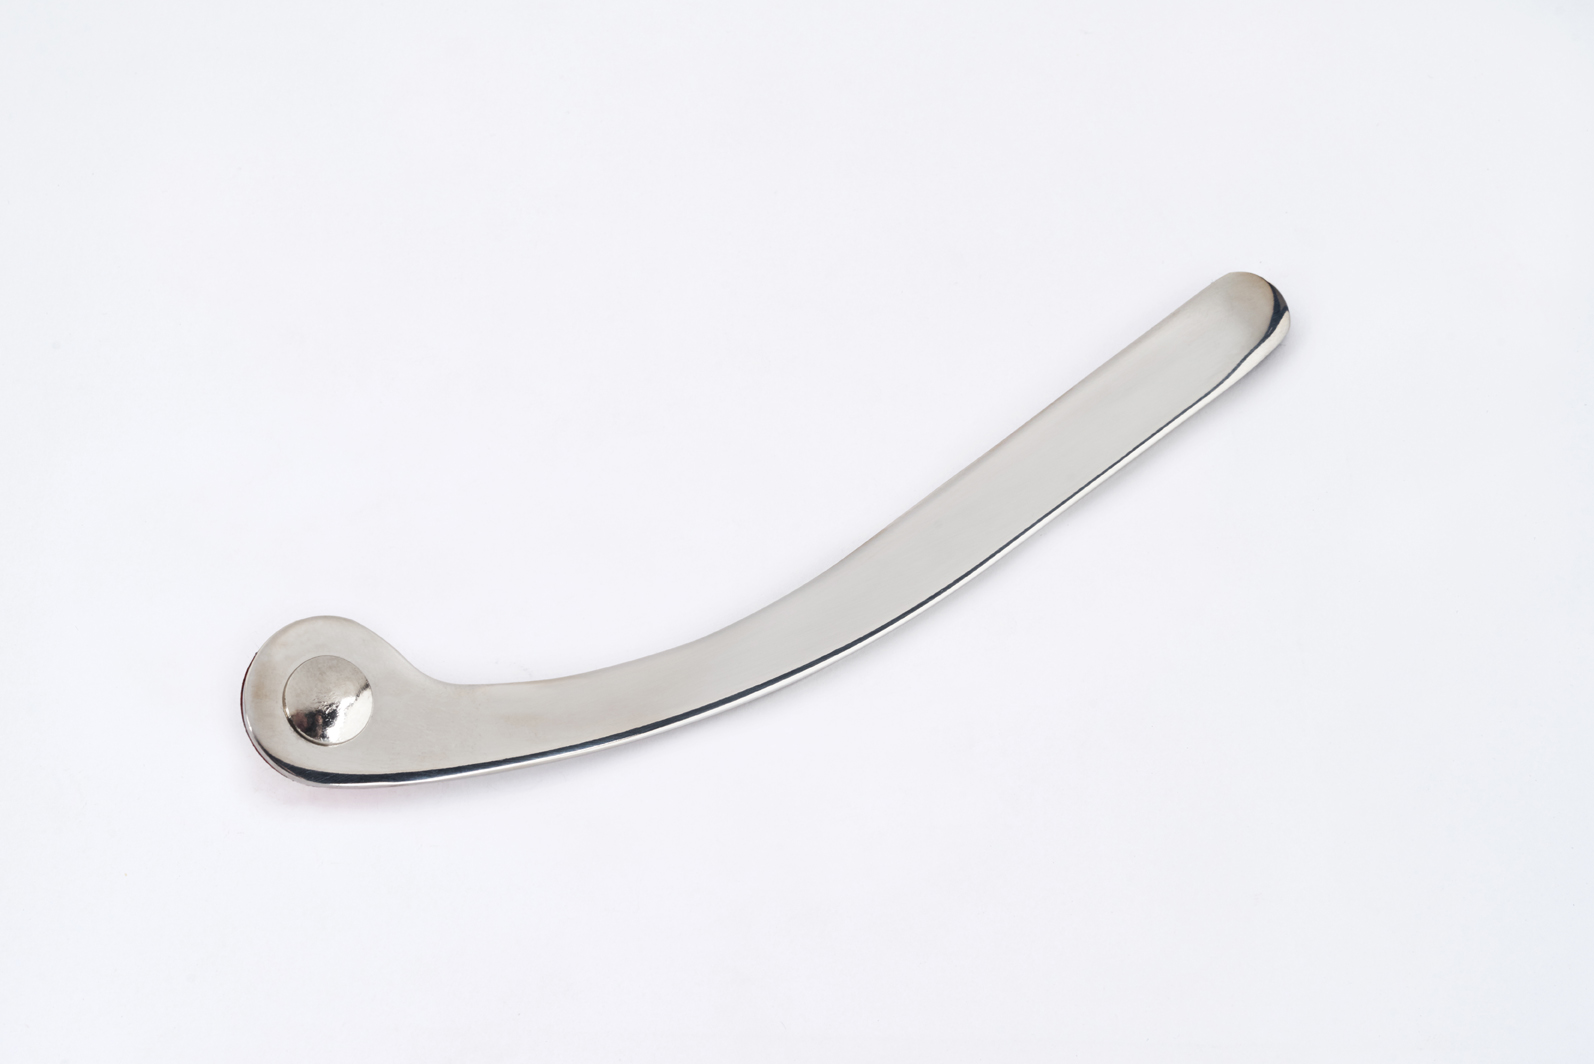 Bigsby Handle, Flat w-stud and small parts